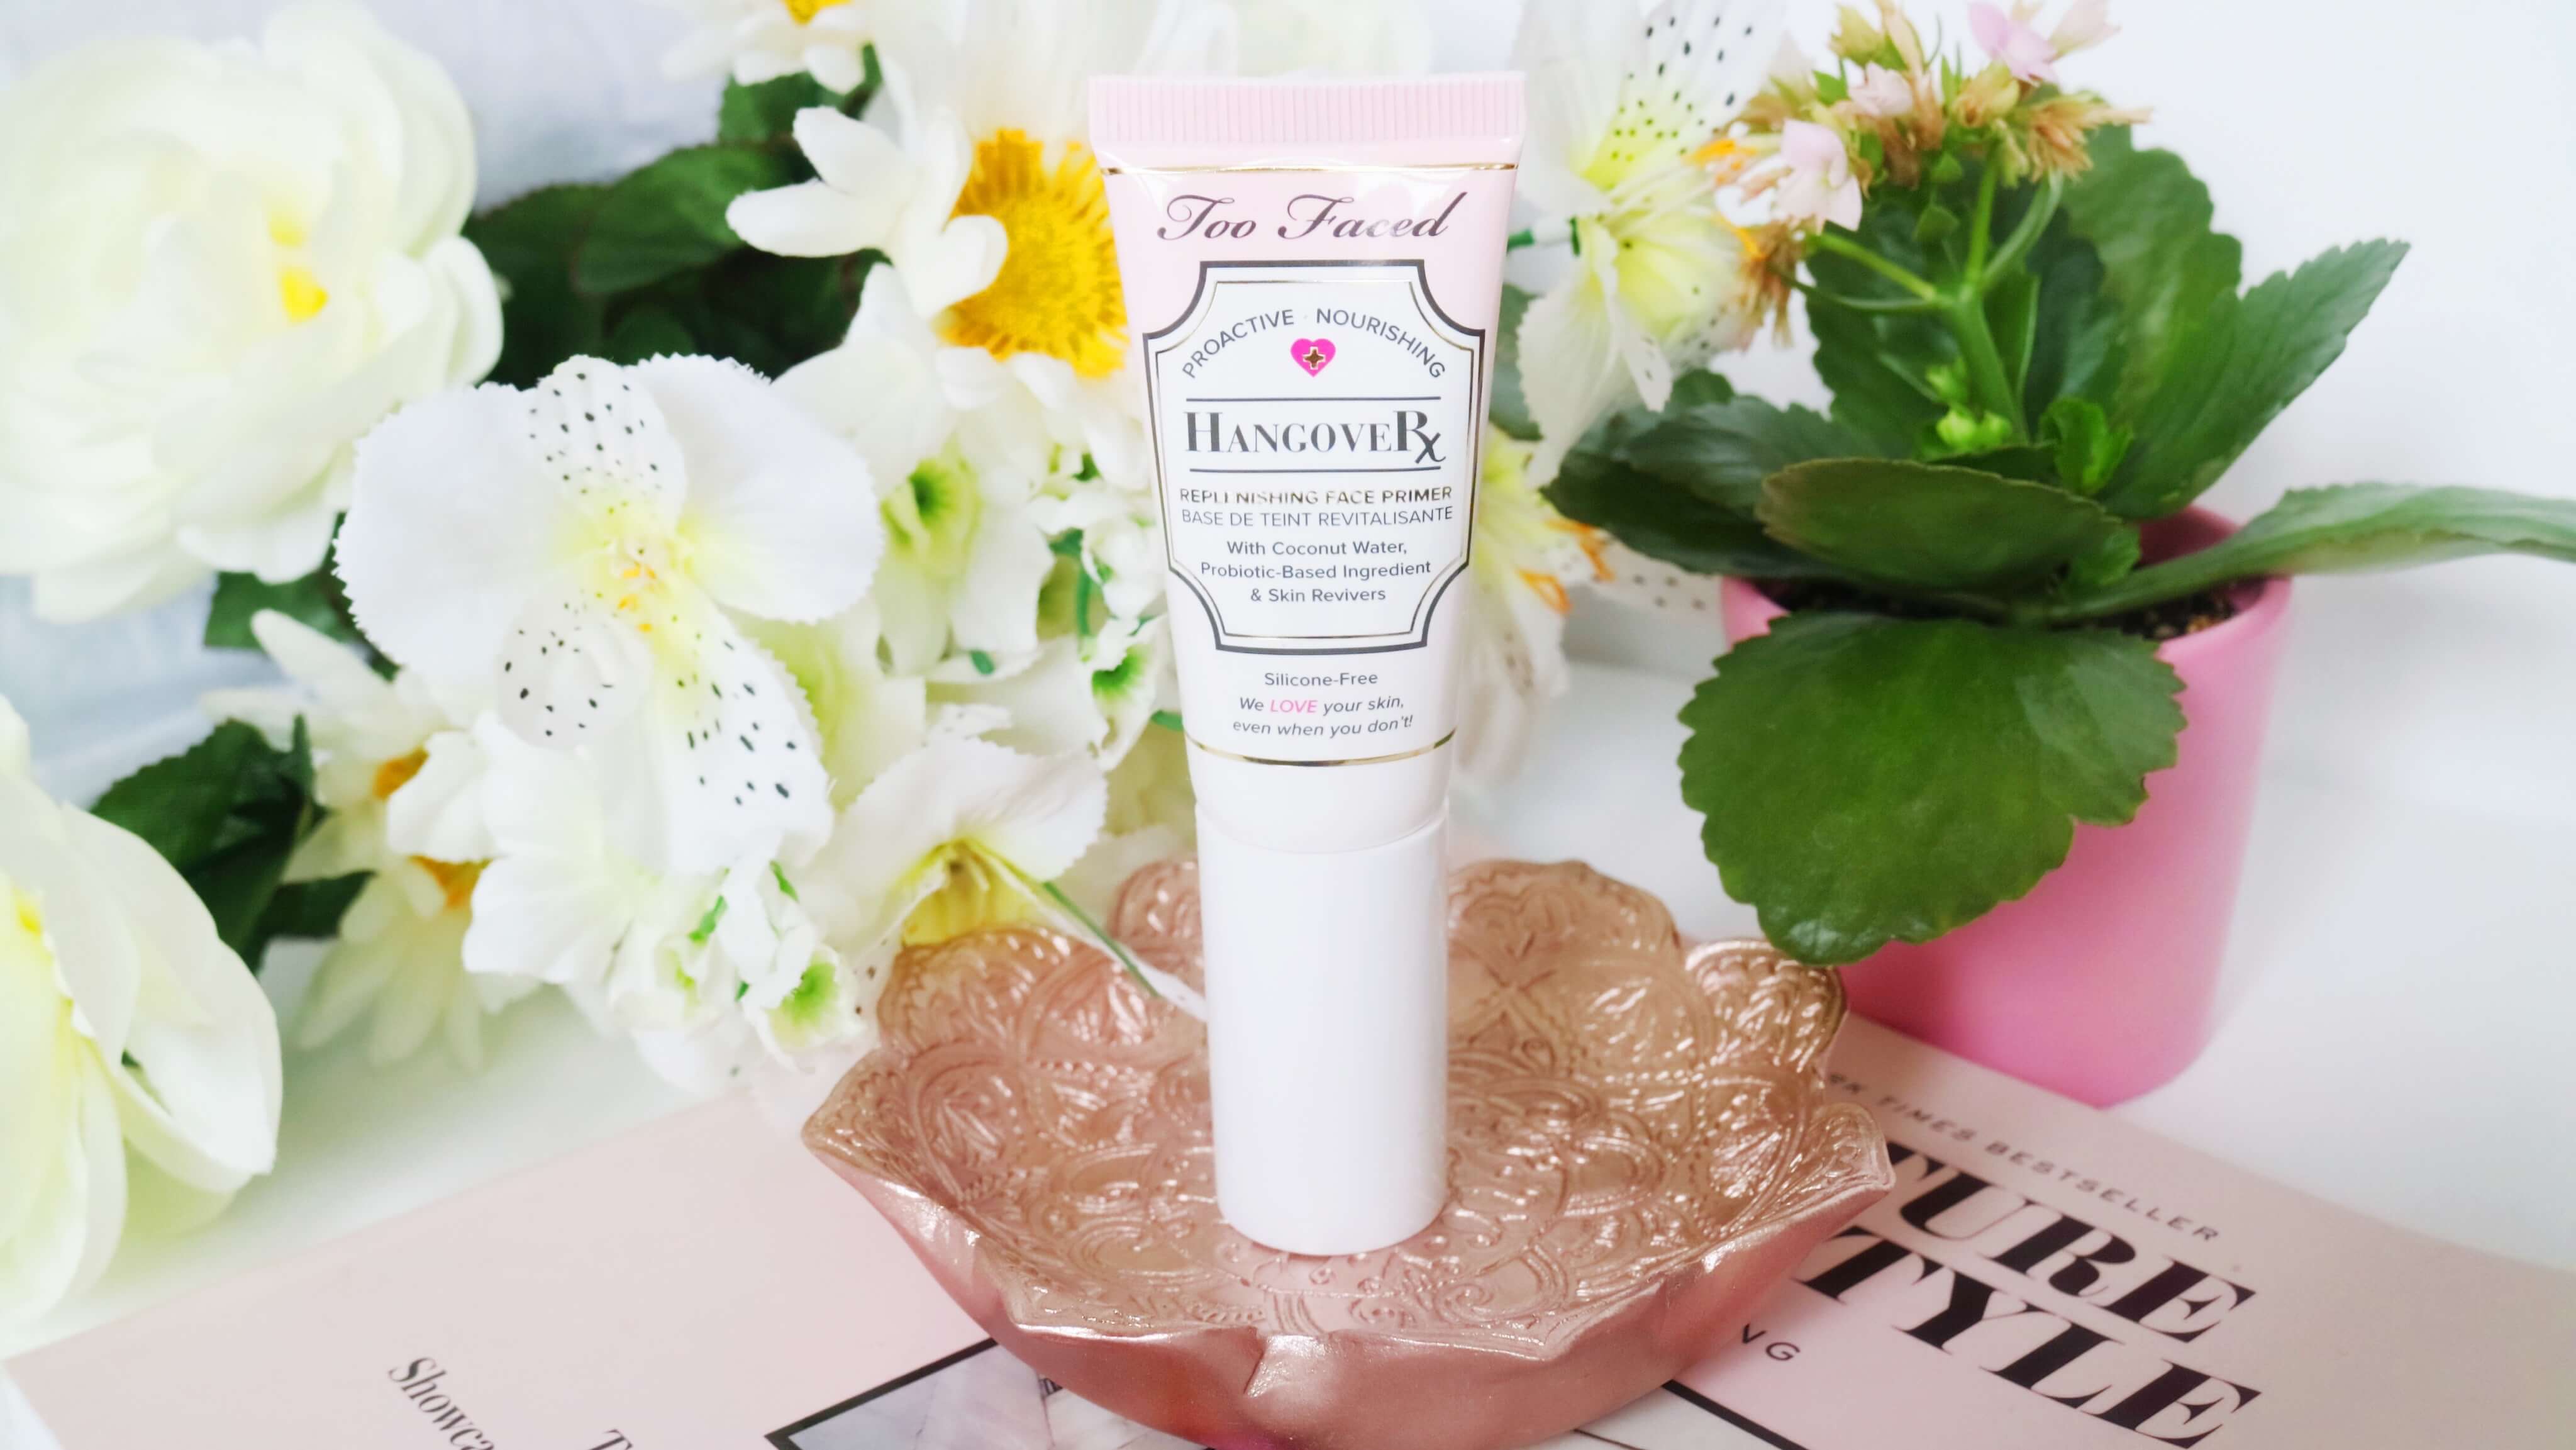 Too faced hangover face primer silicone free review